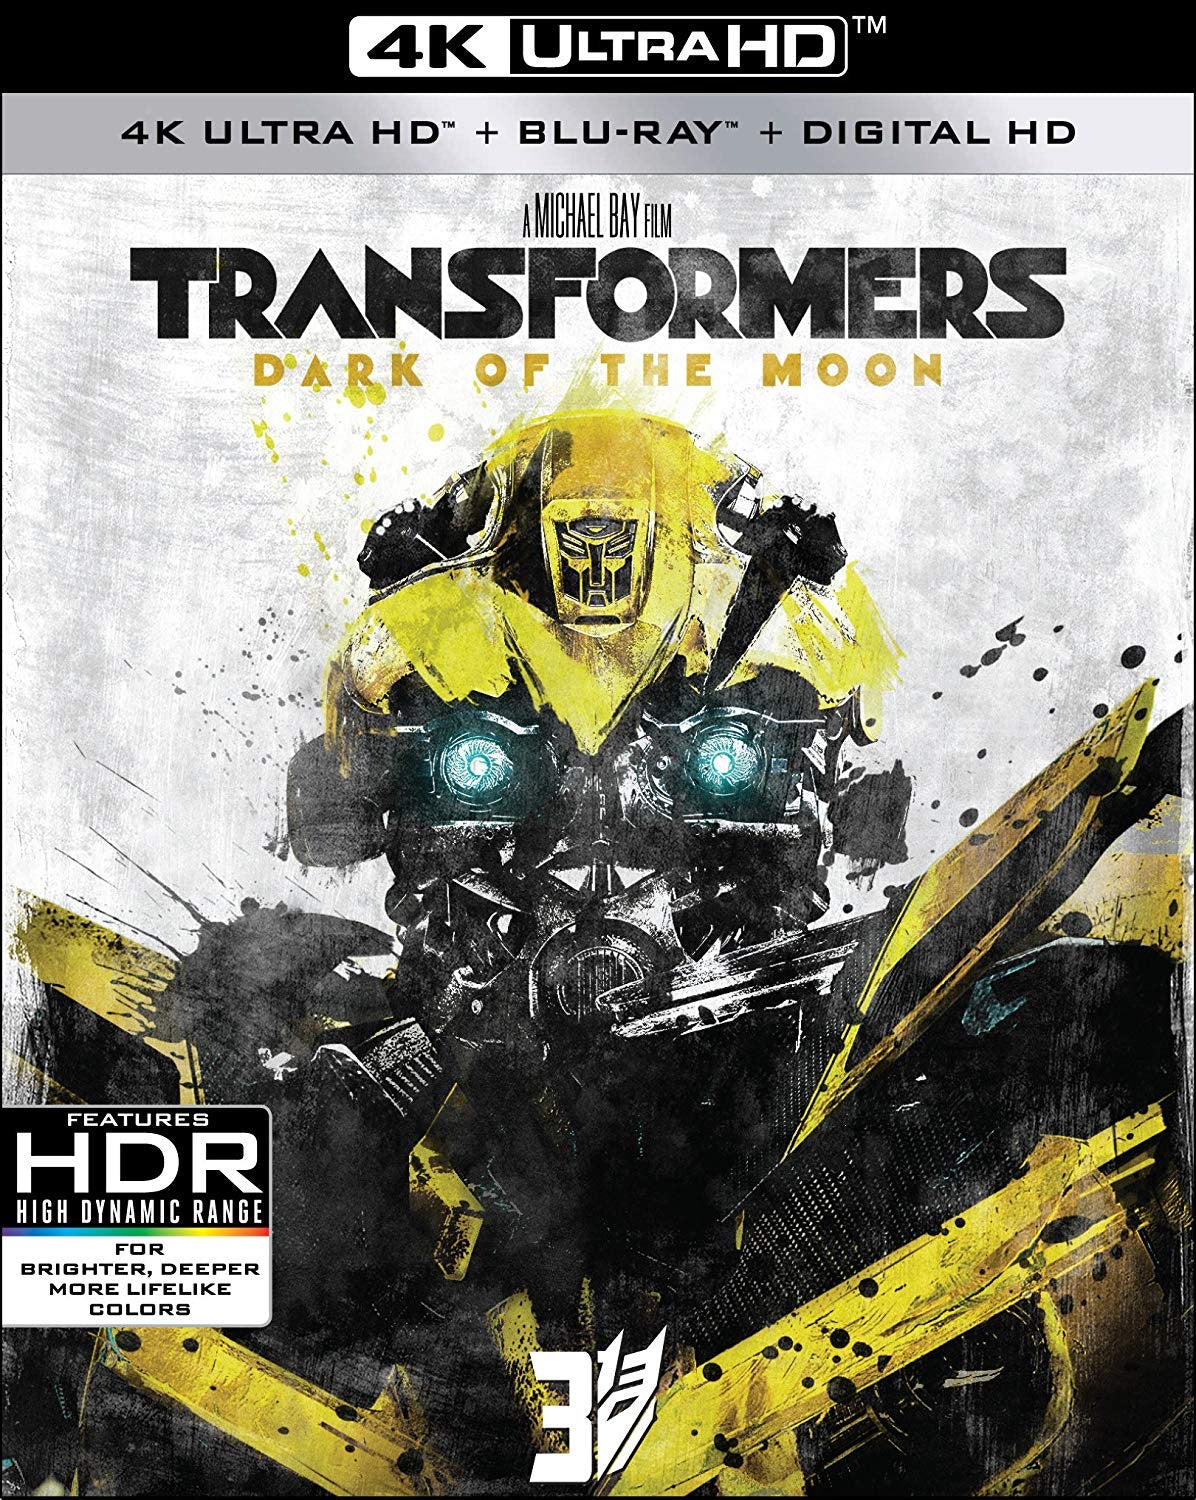 Transformers: Dark of the Moon (2011) iTunes 4K redemption only